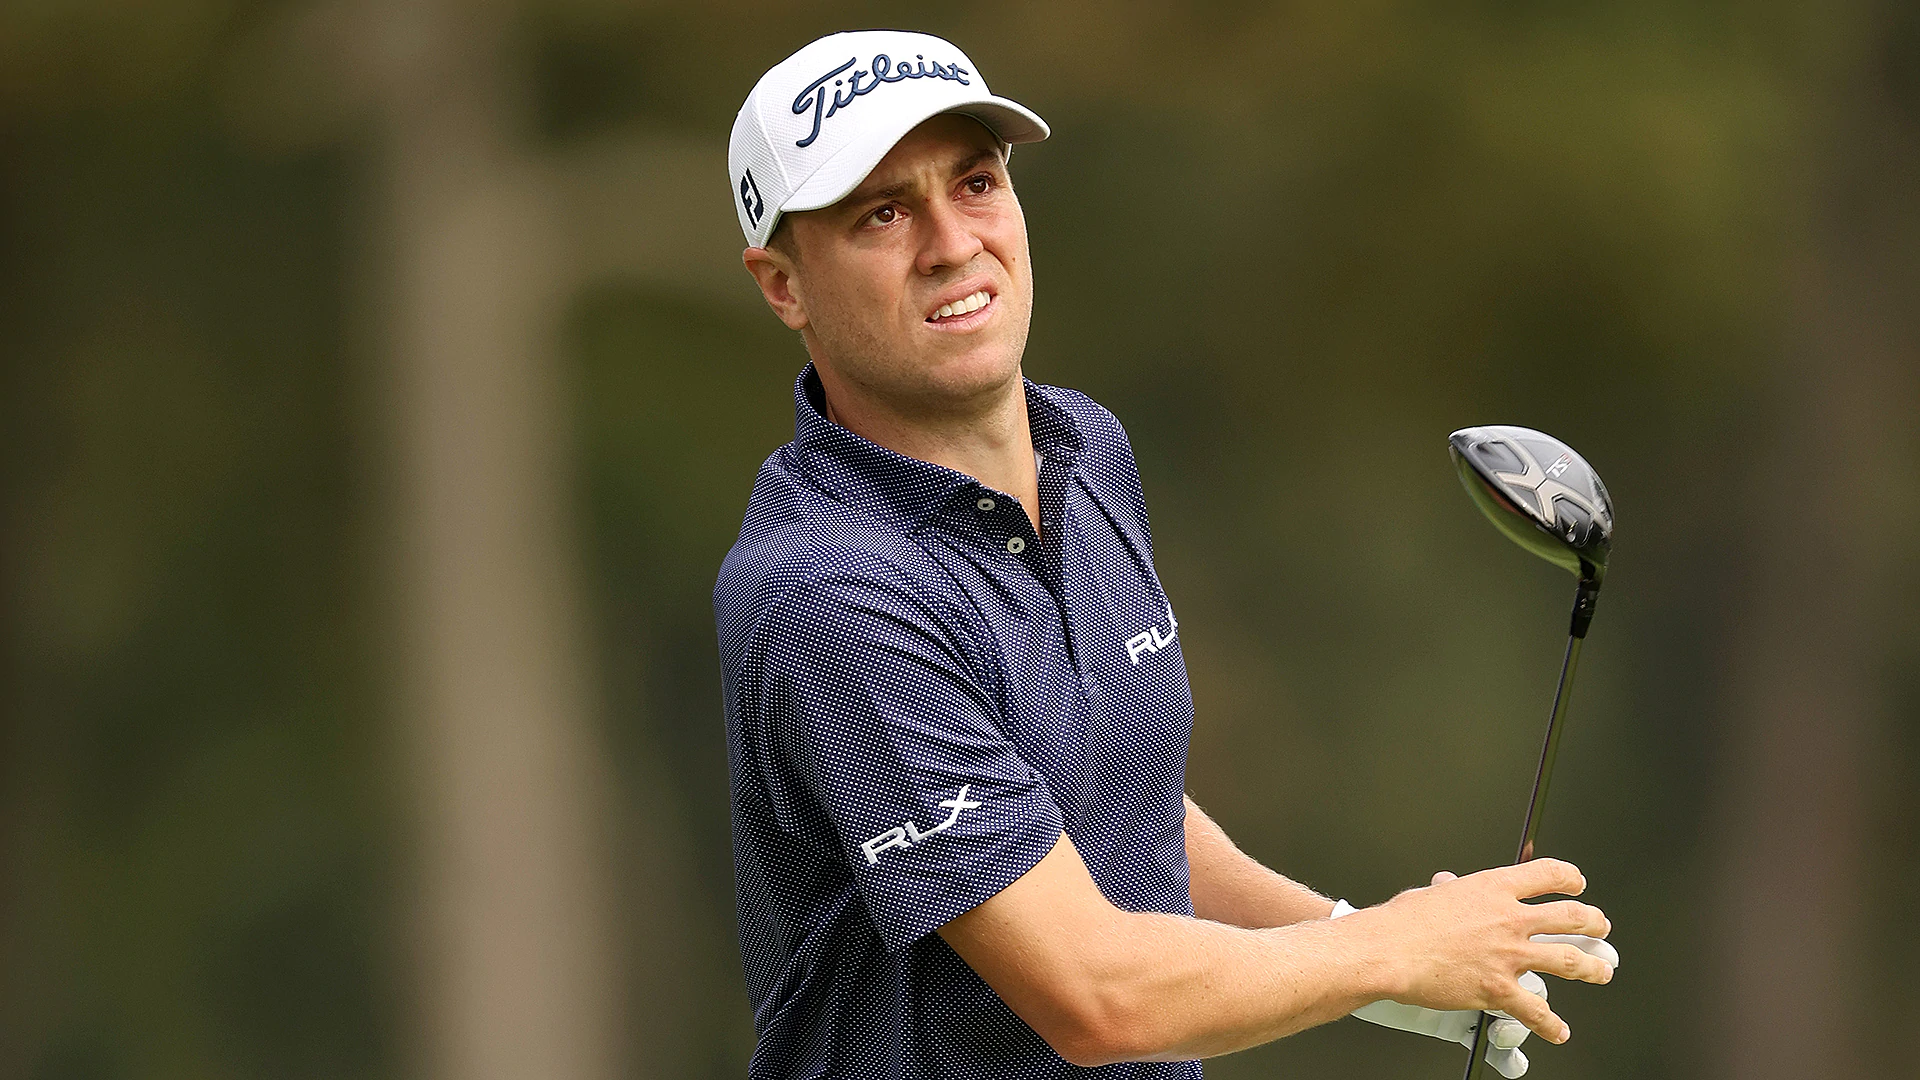 The need for speed: Justin Thomas working to increase speed, distance 4